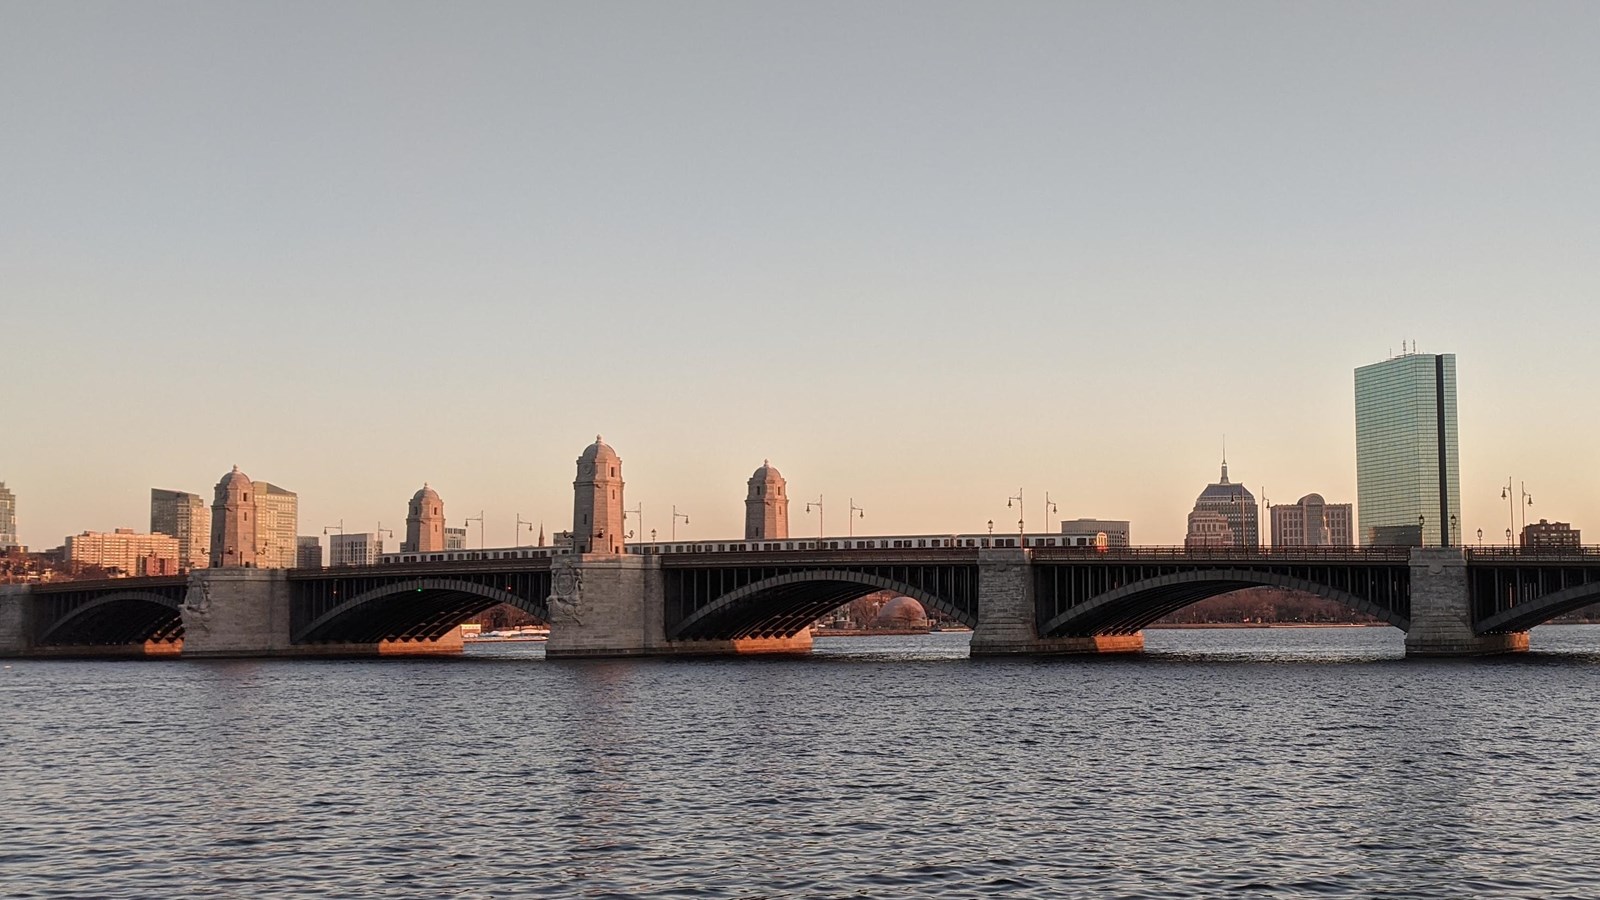 Bridge over river with stone supports and metal arches. Boston skyline in background.